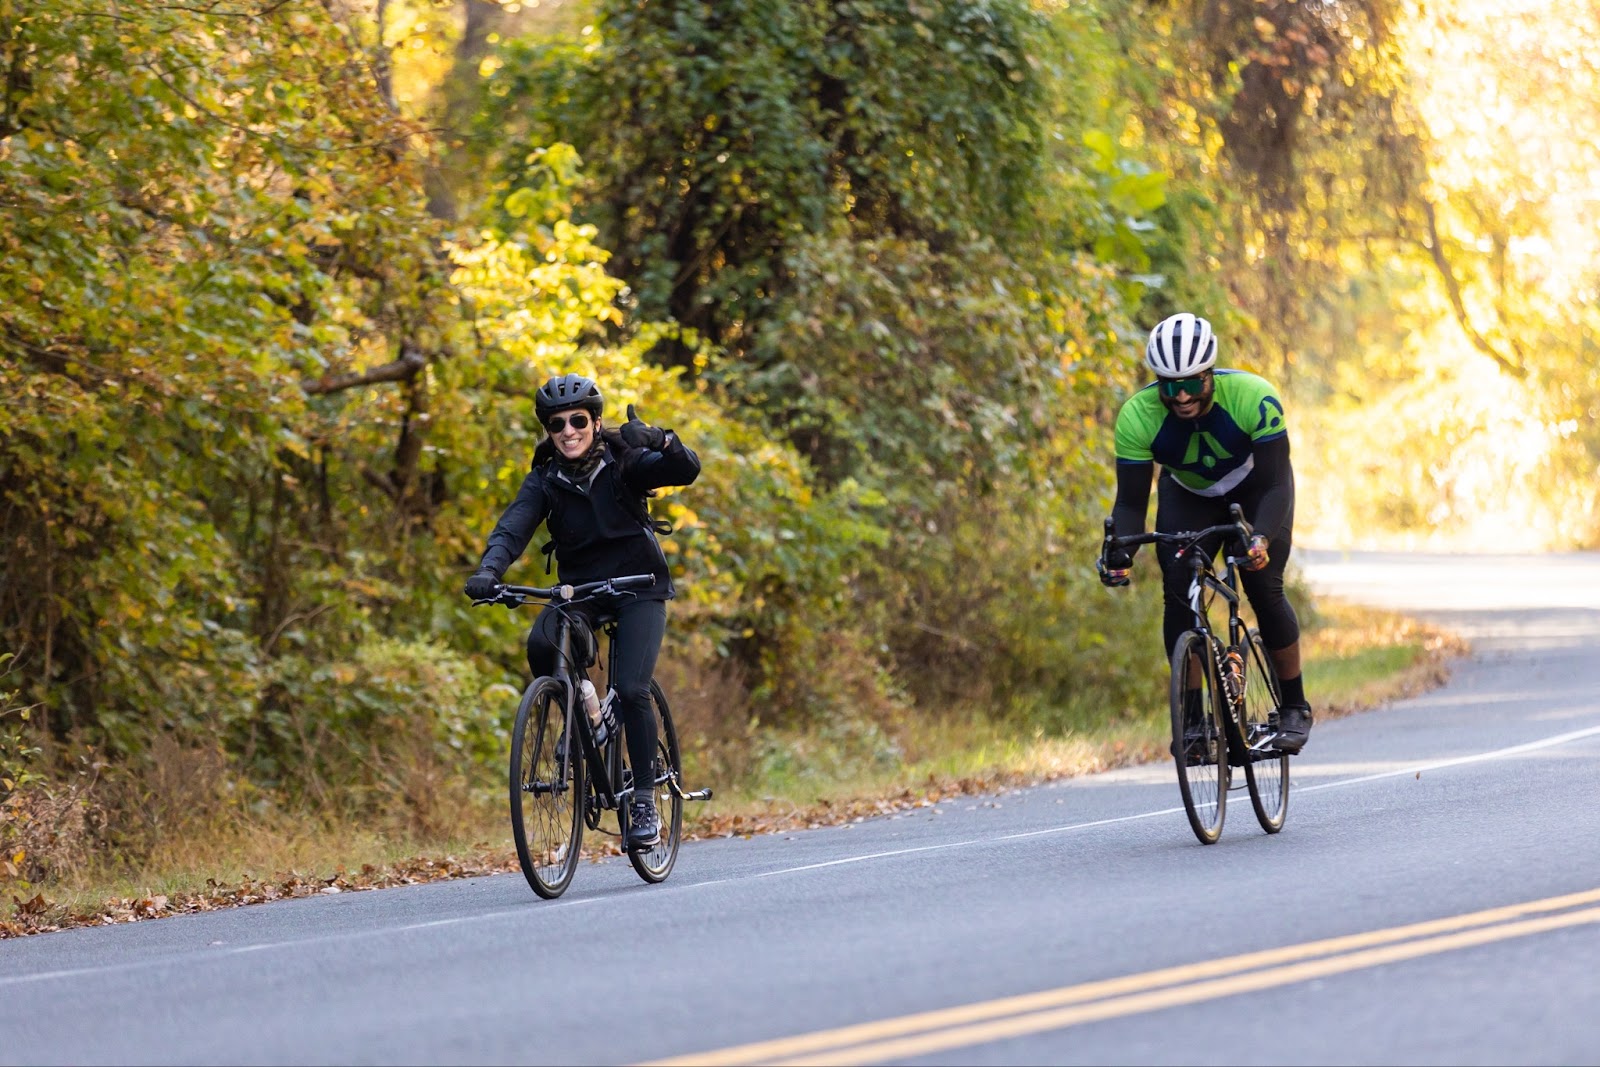 Two BellRinger riders riding their bikes on a scenic road smiling